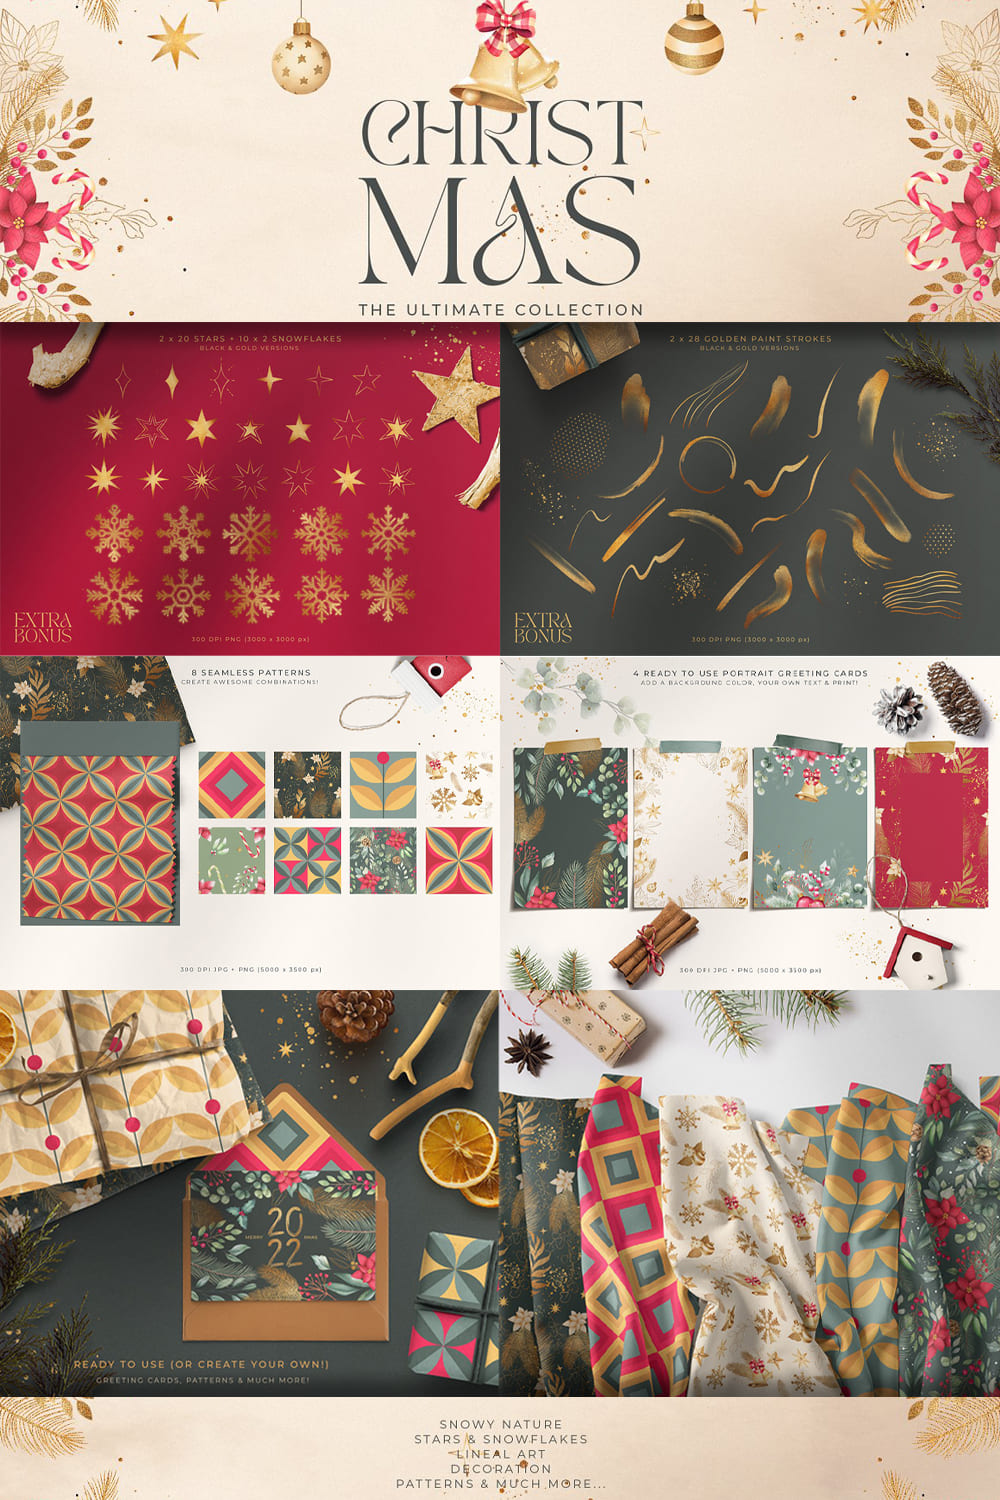 Collage of images of Christmas patterns with patterns, lines and snowflakes.